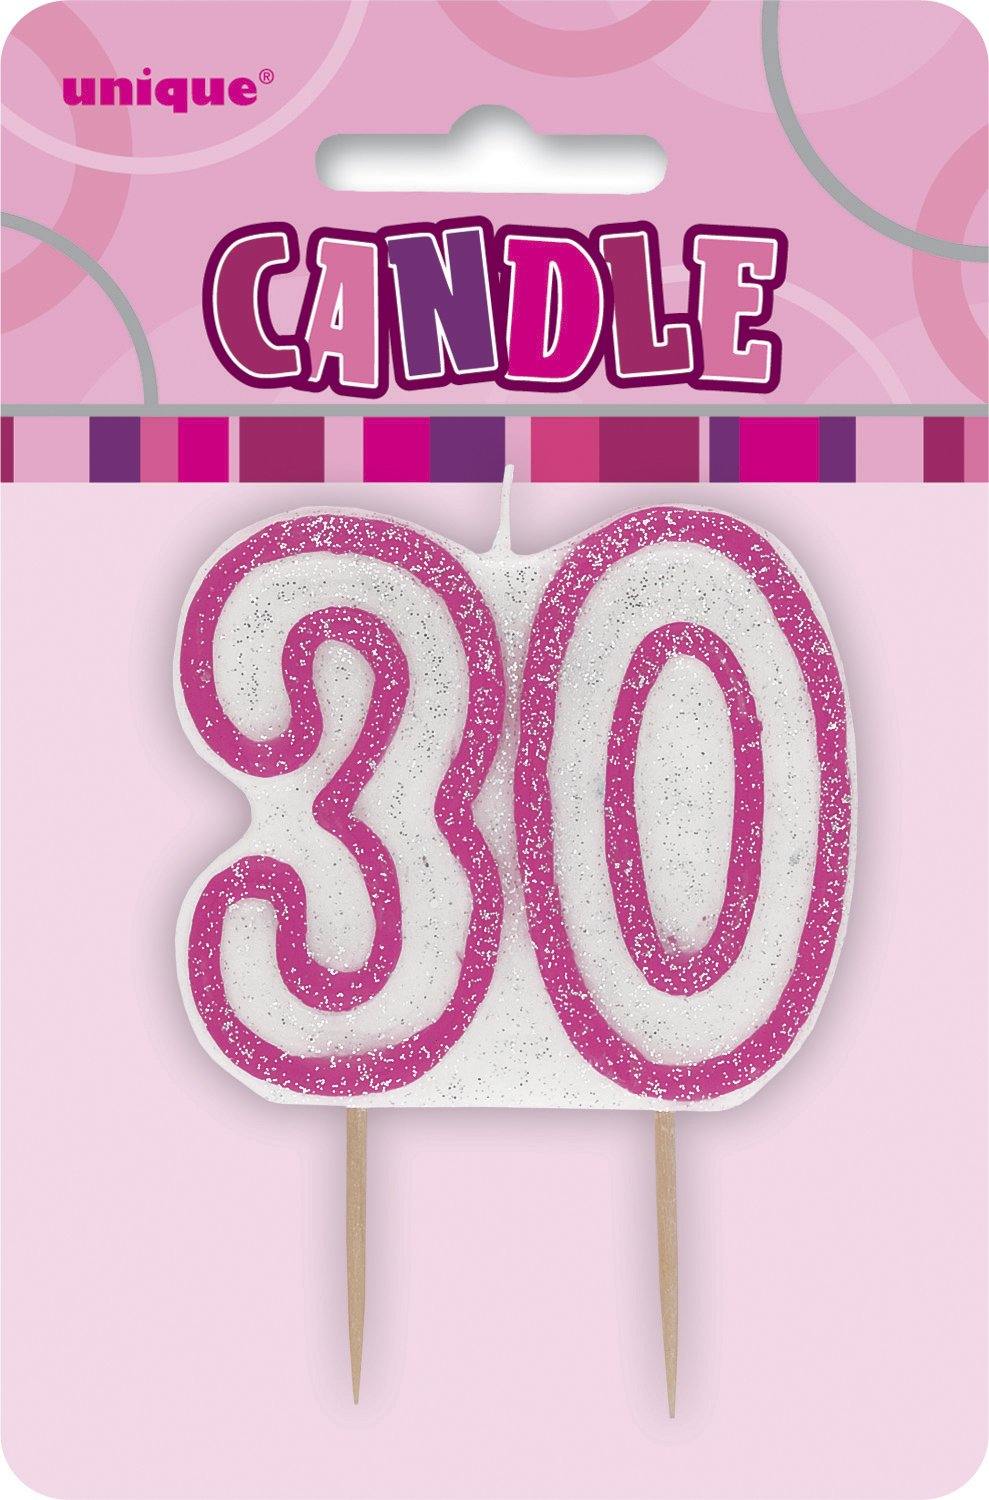 Glitz Pink Numeral 3 Candle - The Base Warehouse